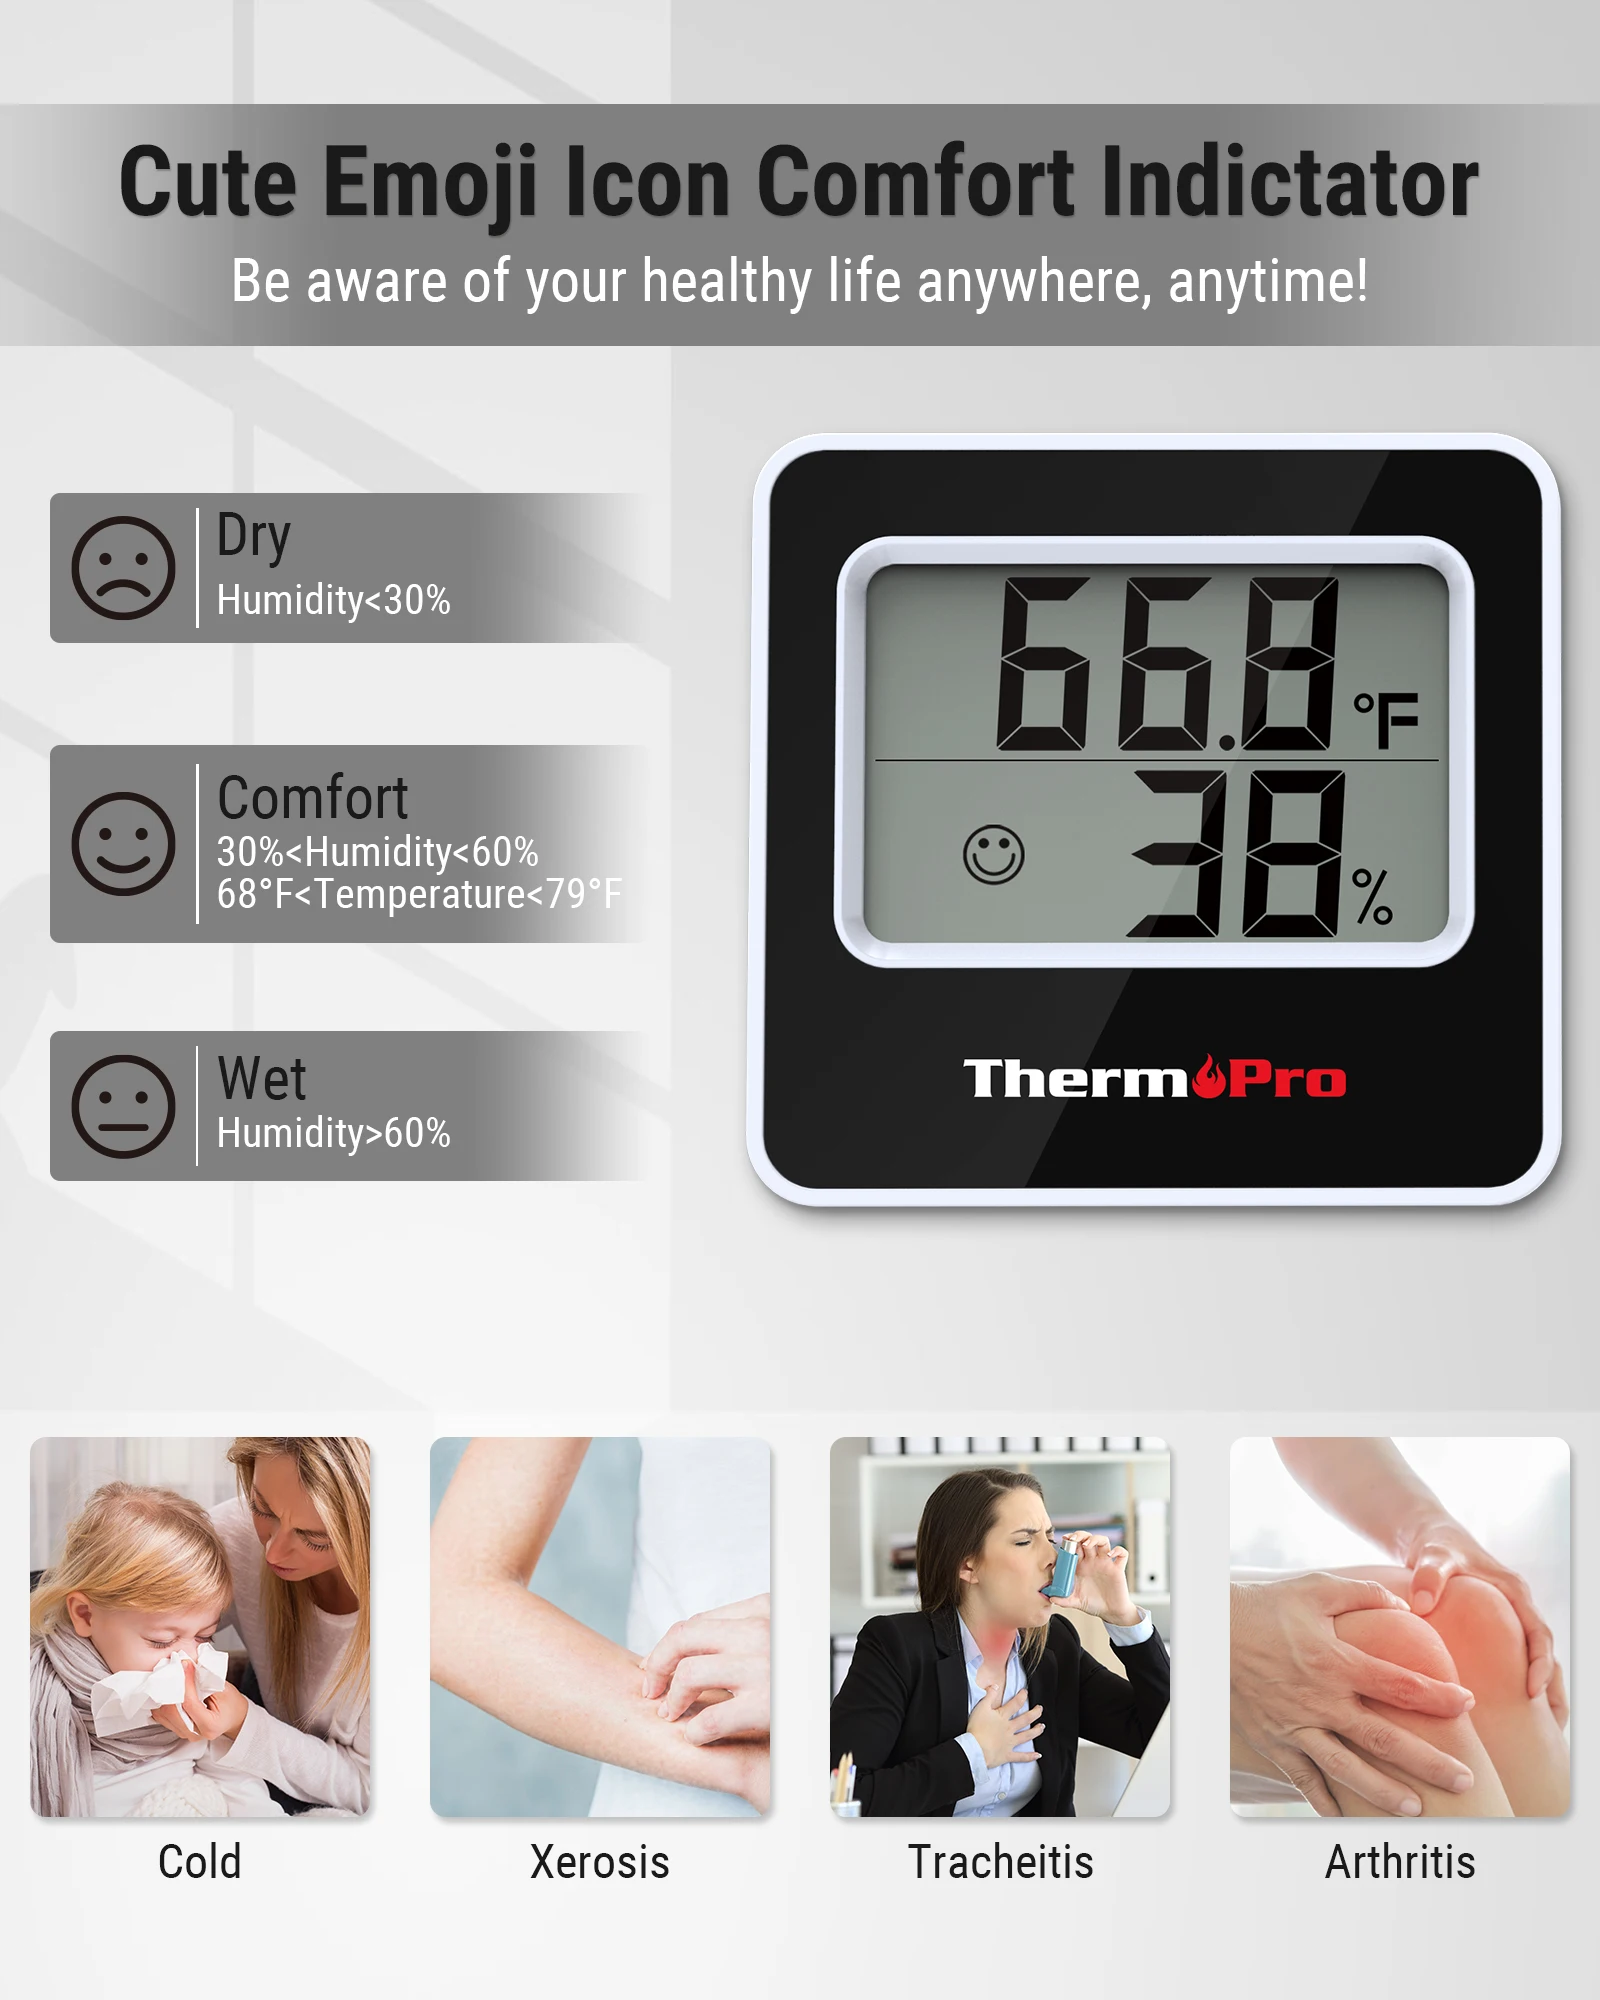 ThermoPro TP49 Digital Indoor Hygrometer Thermometer Humidity Monitor